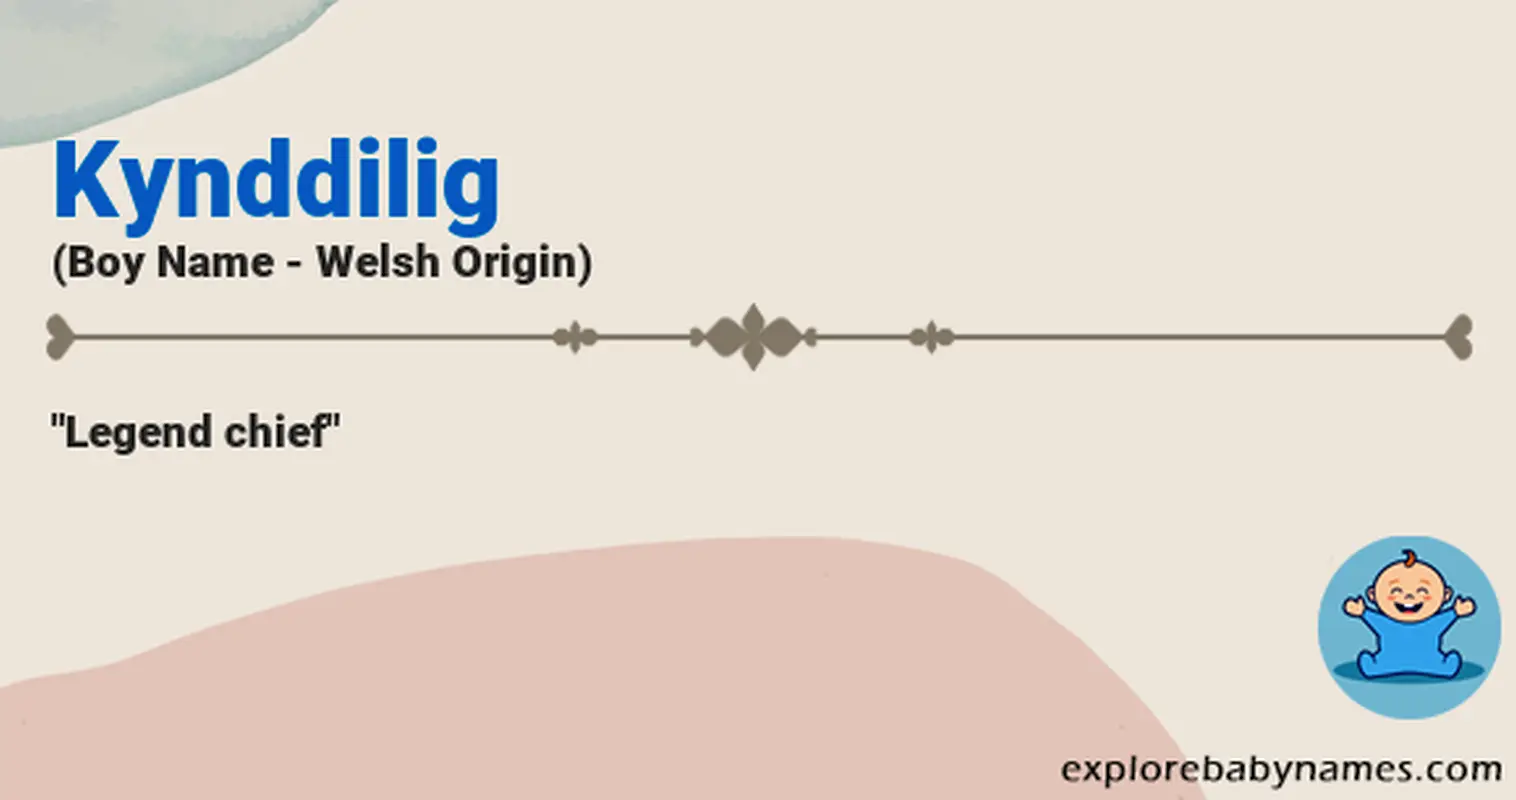 Meaning of Kynddilig